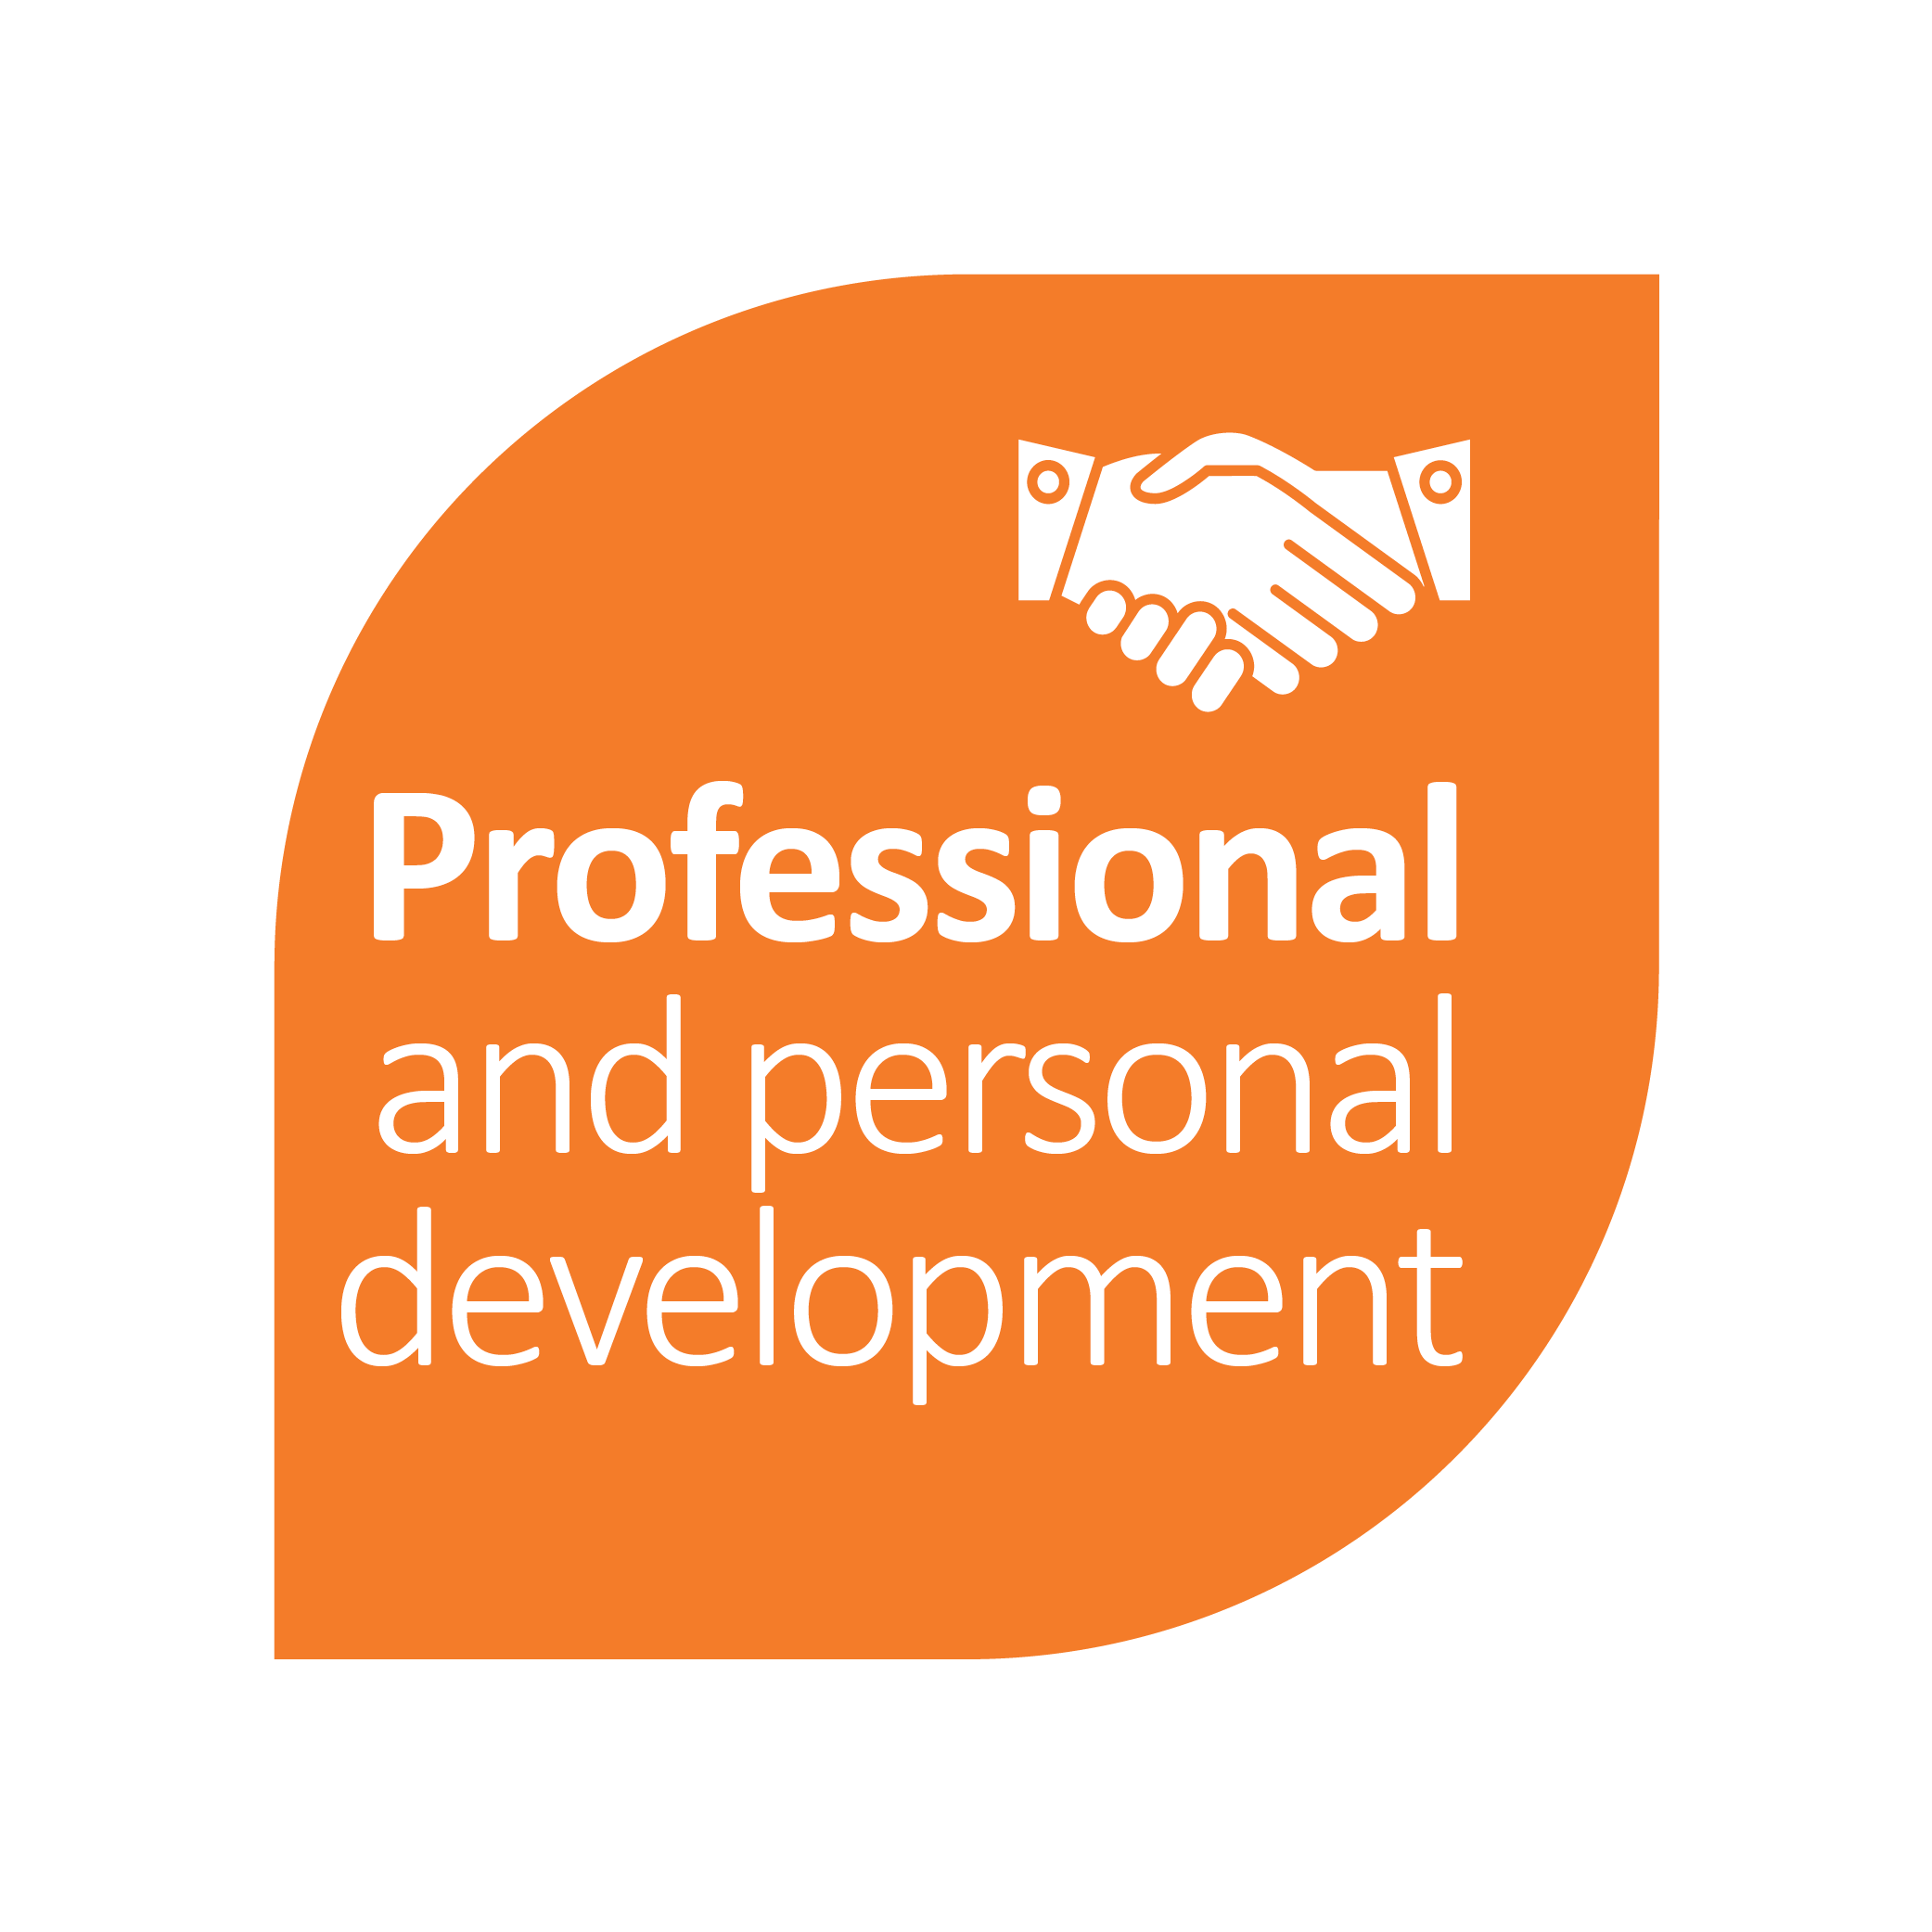 Text that reads 'Professional and personal development' in an orange leaf shaped object with an image of shaking hands inside it